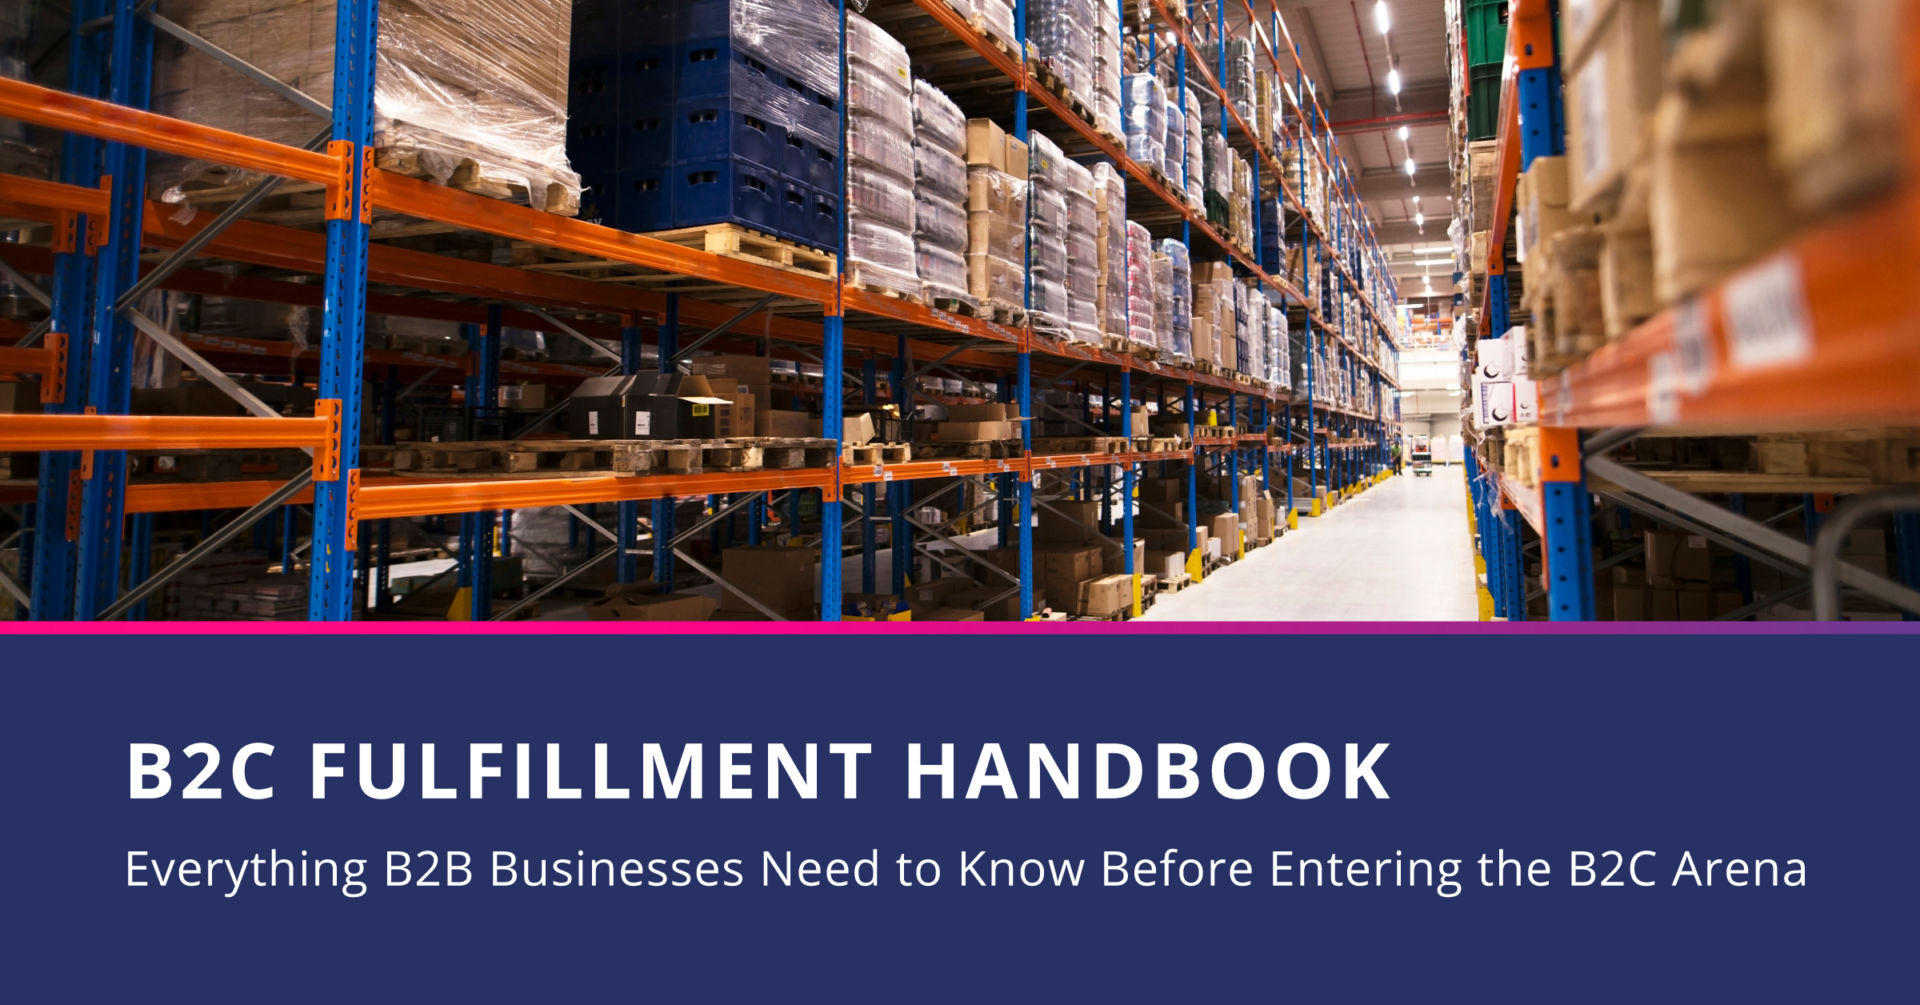 B2C Fulfillment Handbook: Everything B2B Businesses Need to Know Before Entering the B2C Arena